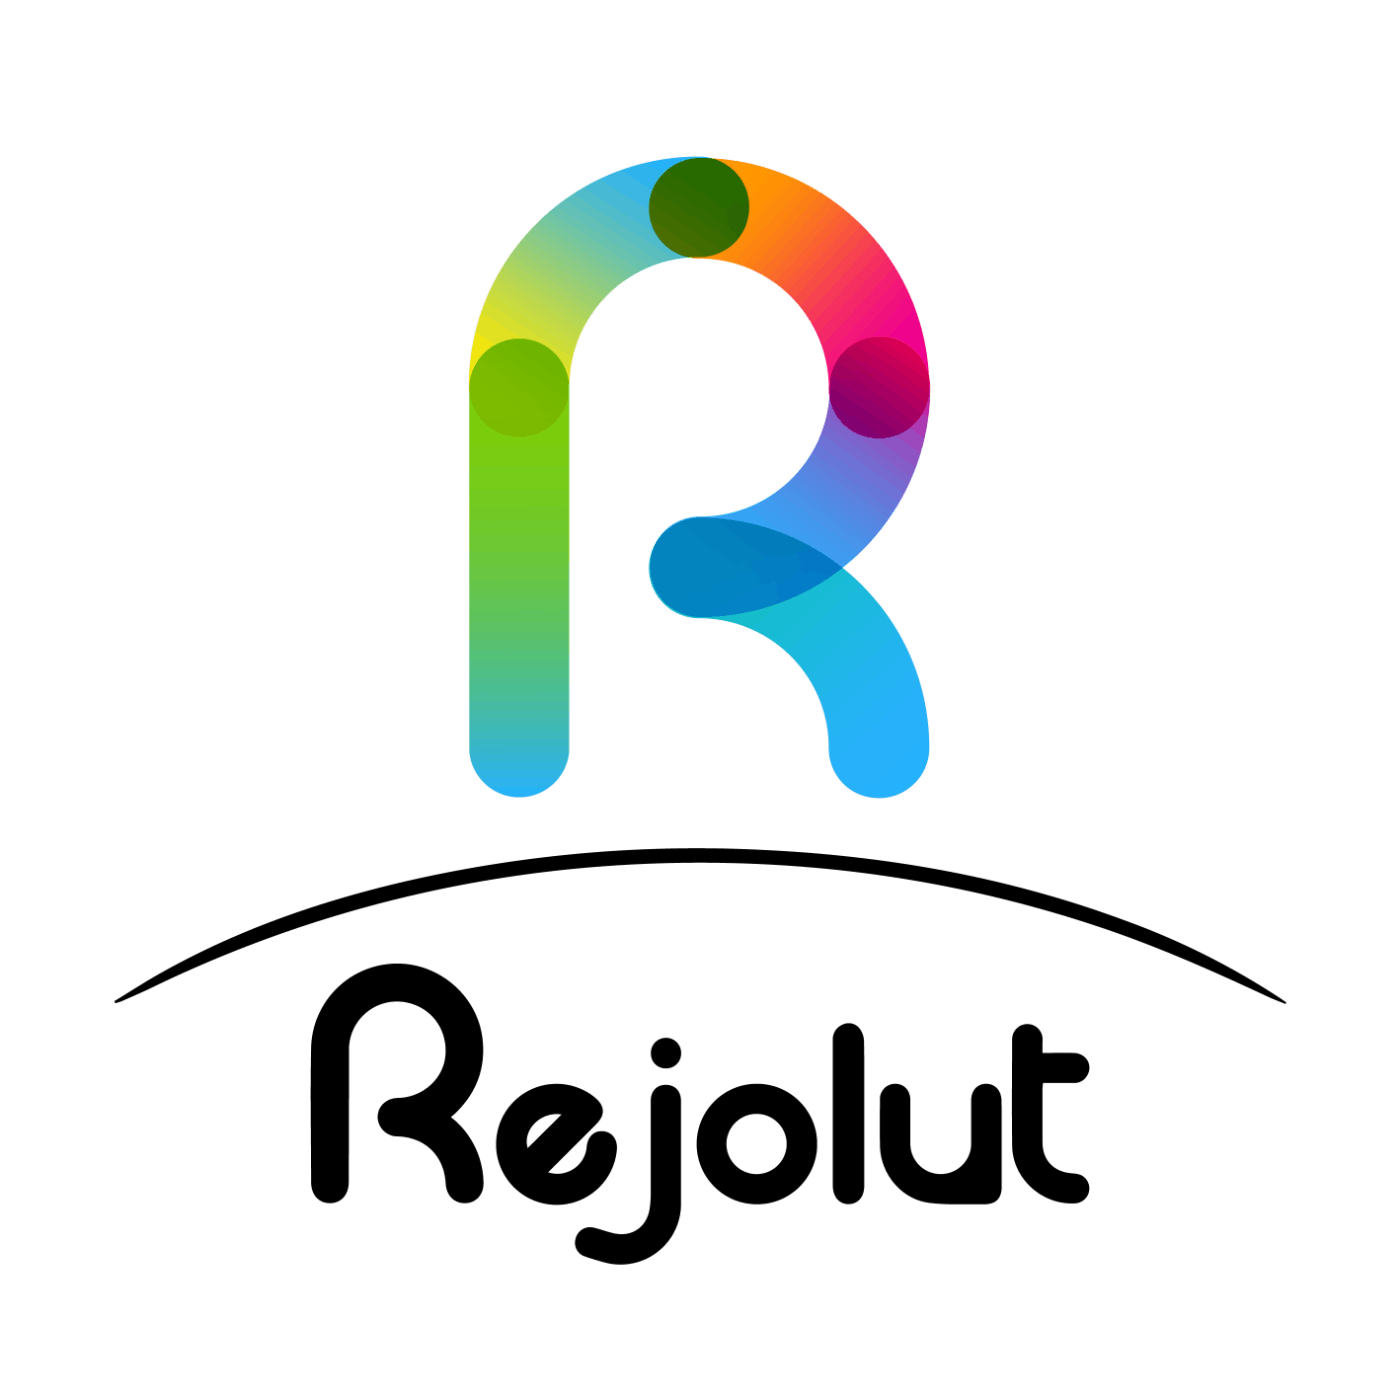 Rejolut Technology Solutions  HackerNoon profile picture